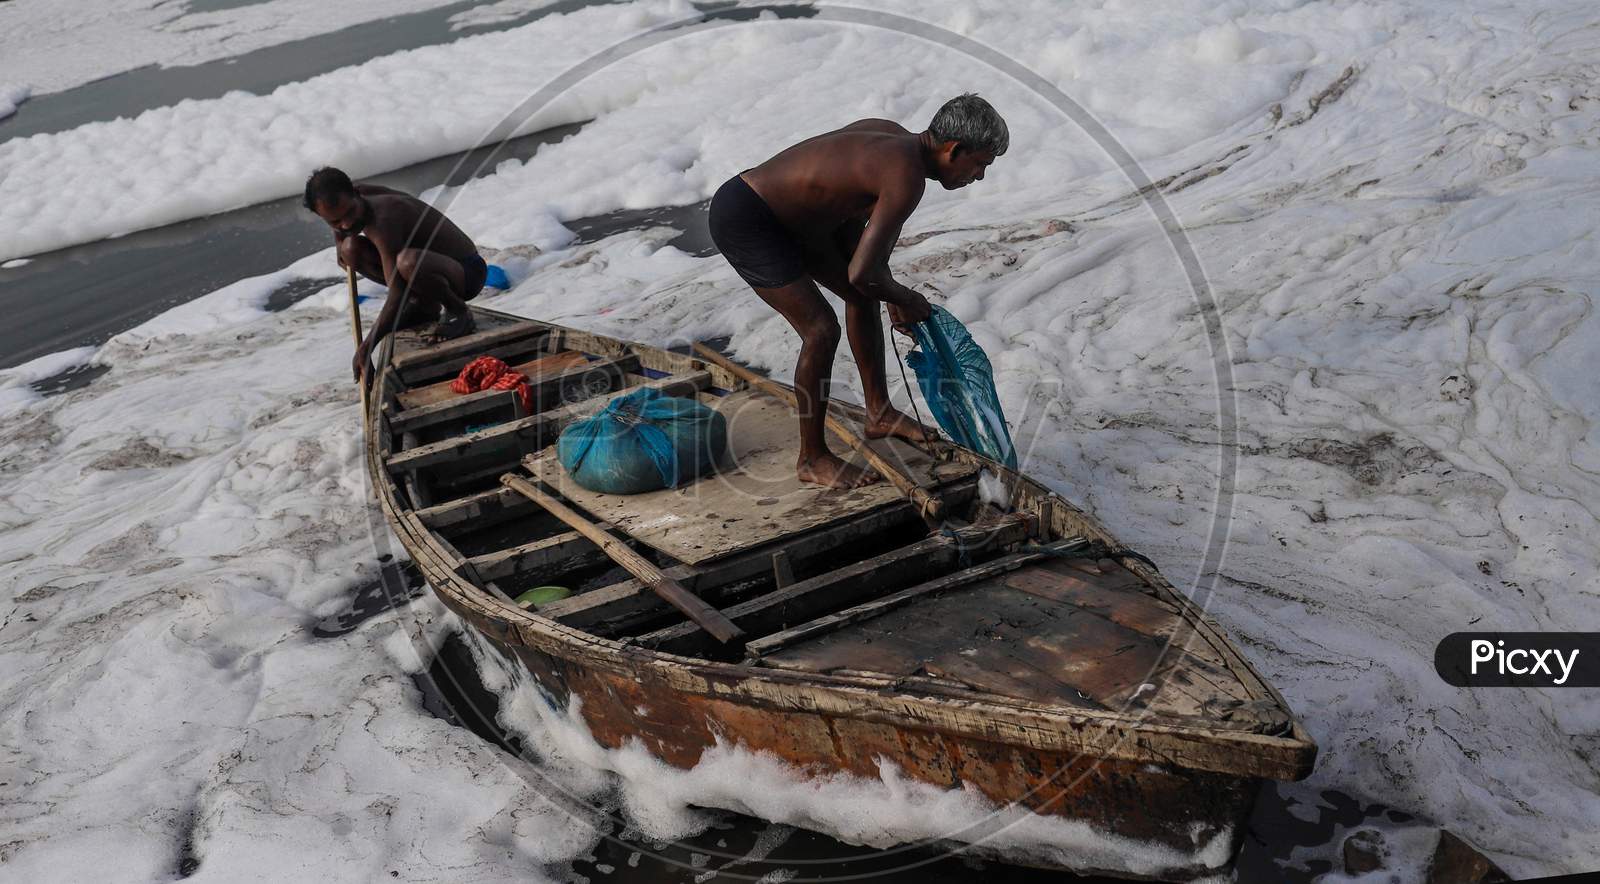 Indian Fishermen Use A Fishing Net In The Polluted Waters Of The Yamuna River On July 30, 2020 In New Delhi, India.